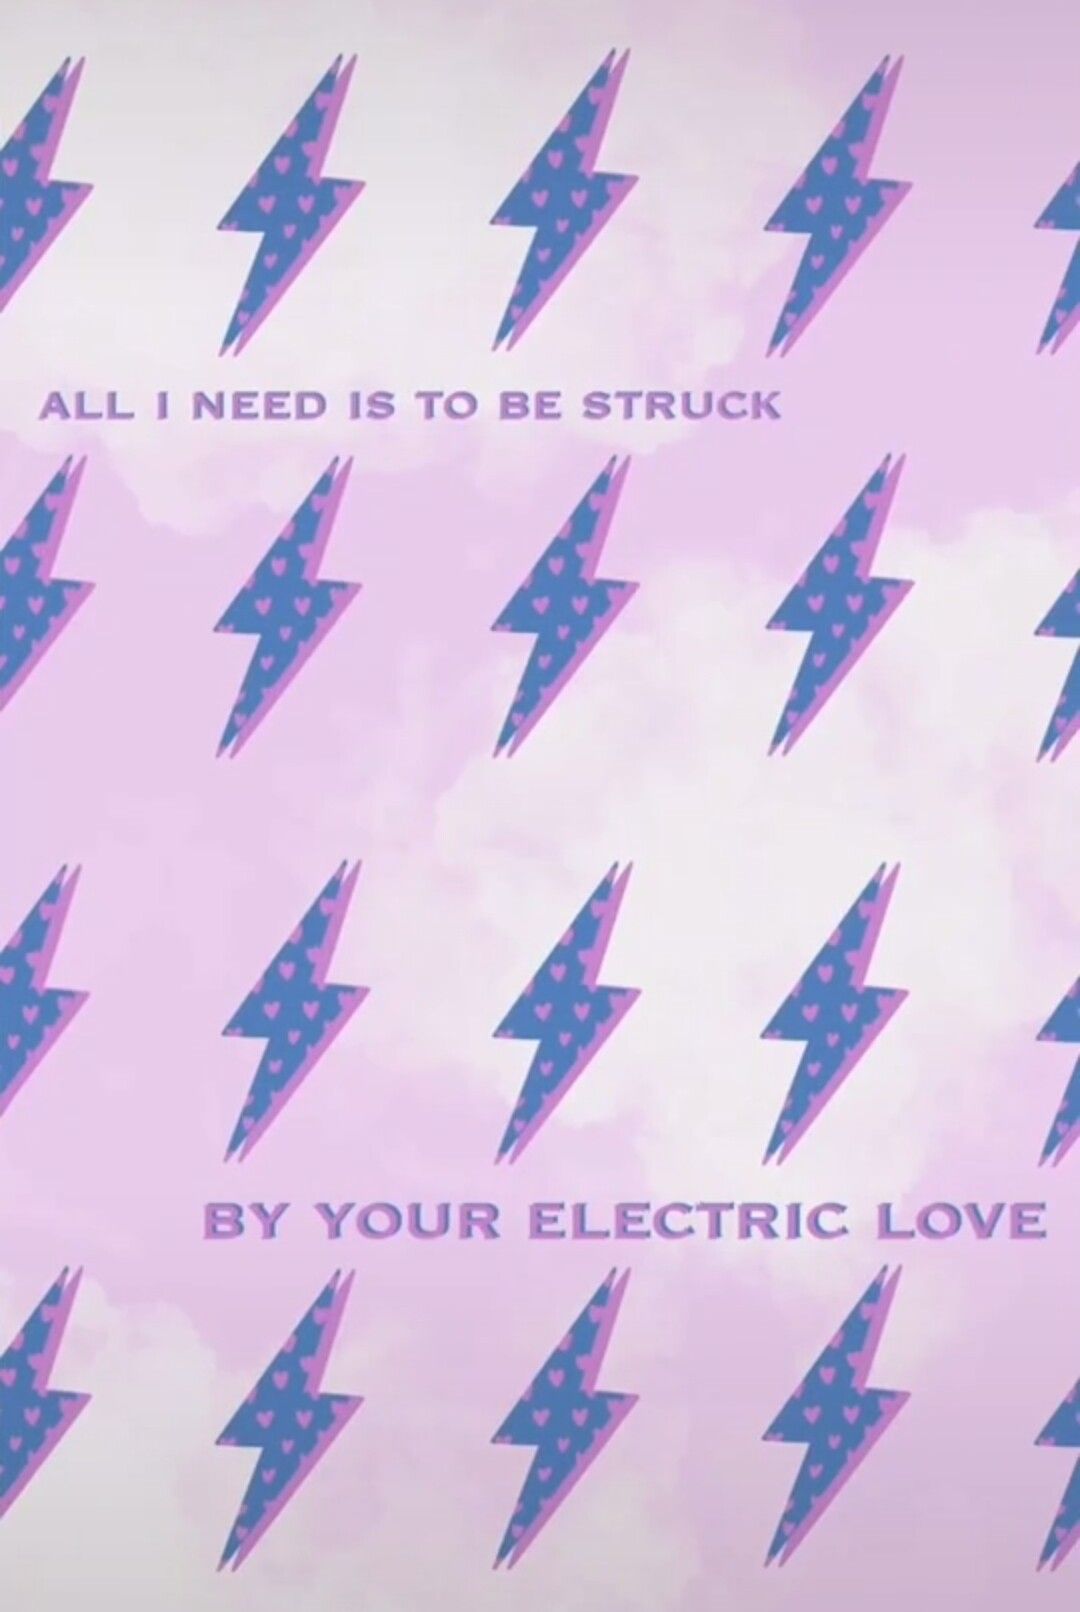 wallpapers with song lyrics on themTikTok Search